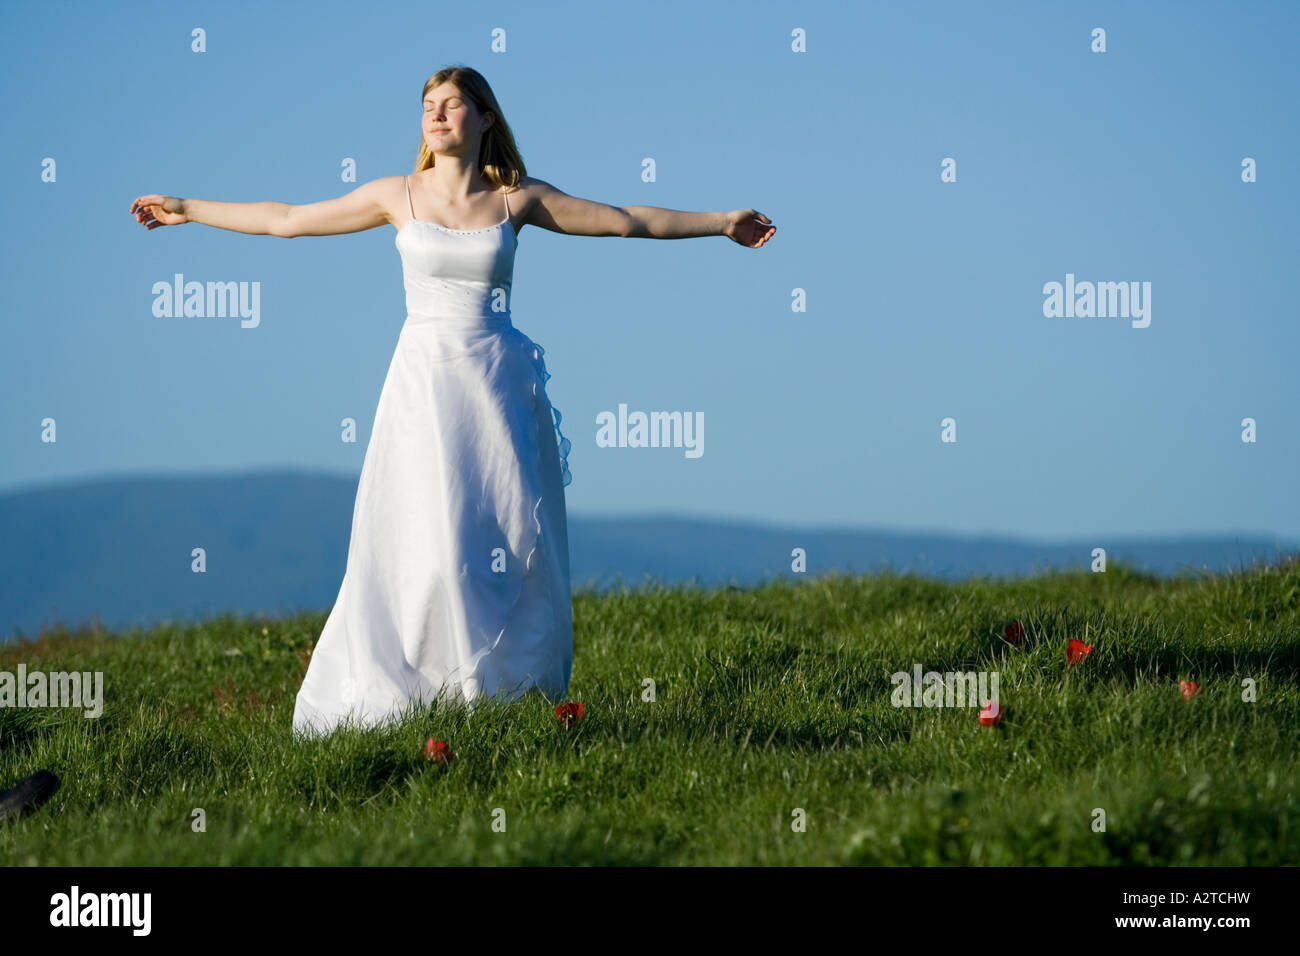 young girl woman female bride dancing in white wedding deb debutant dress on hill Stock Photo